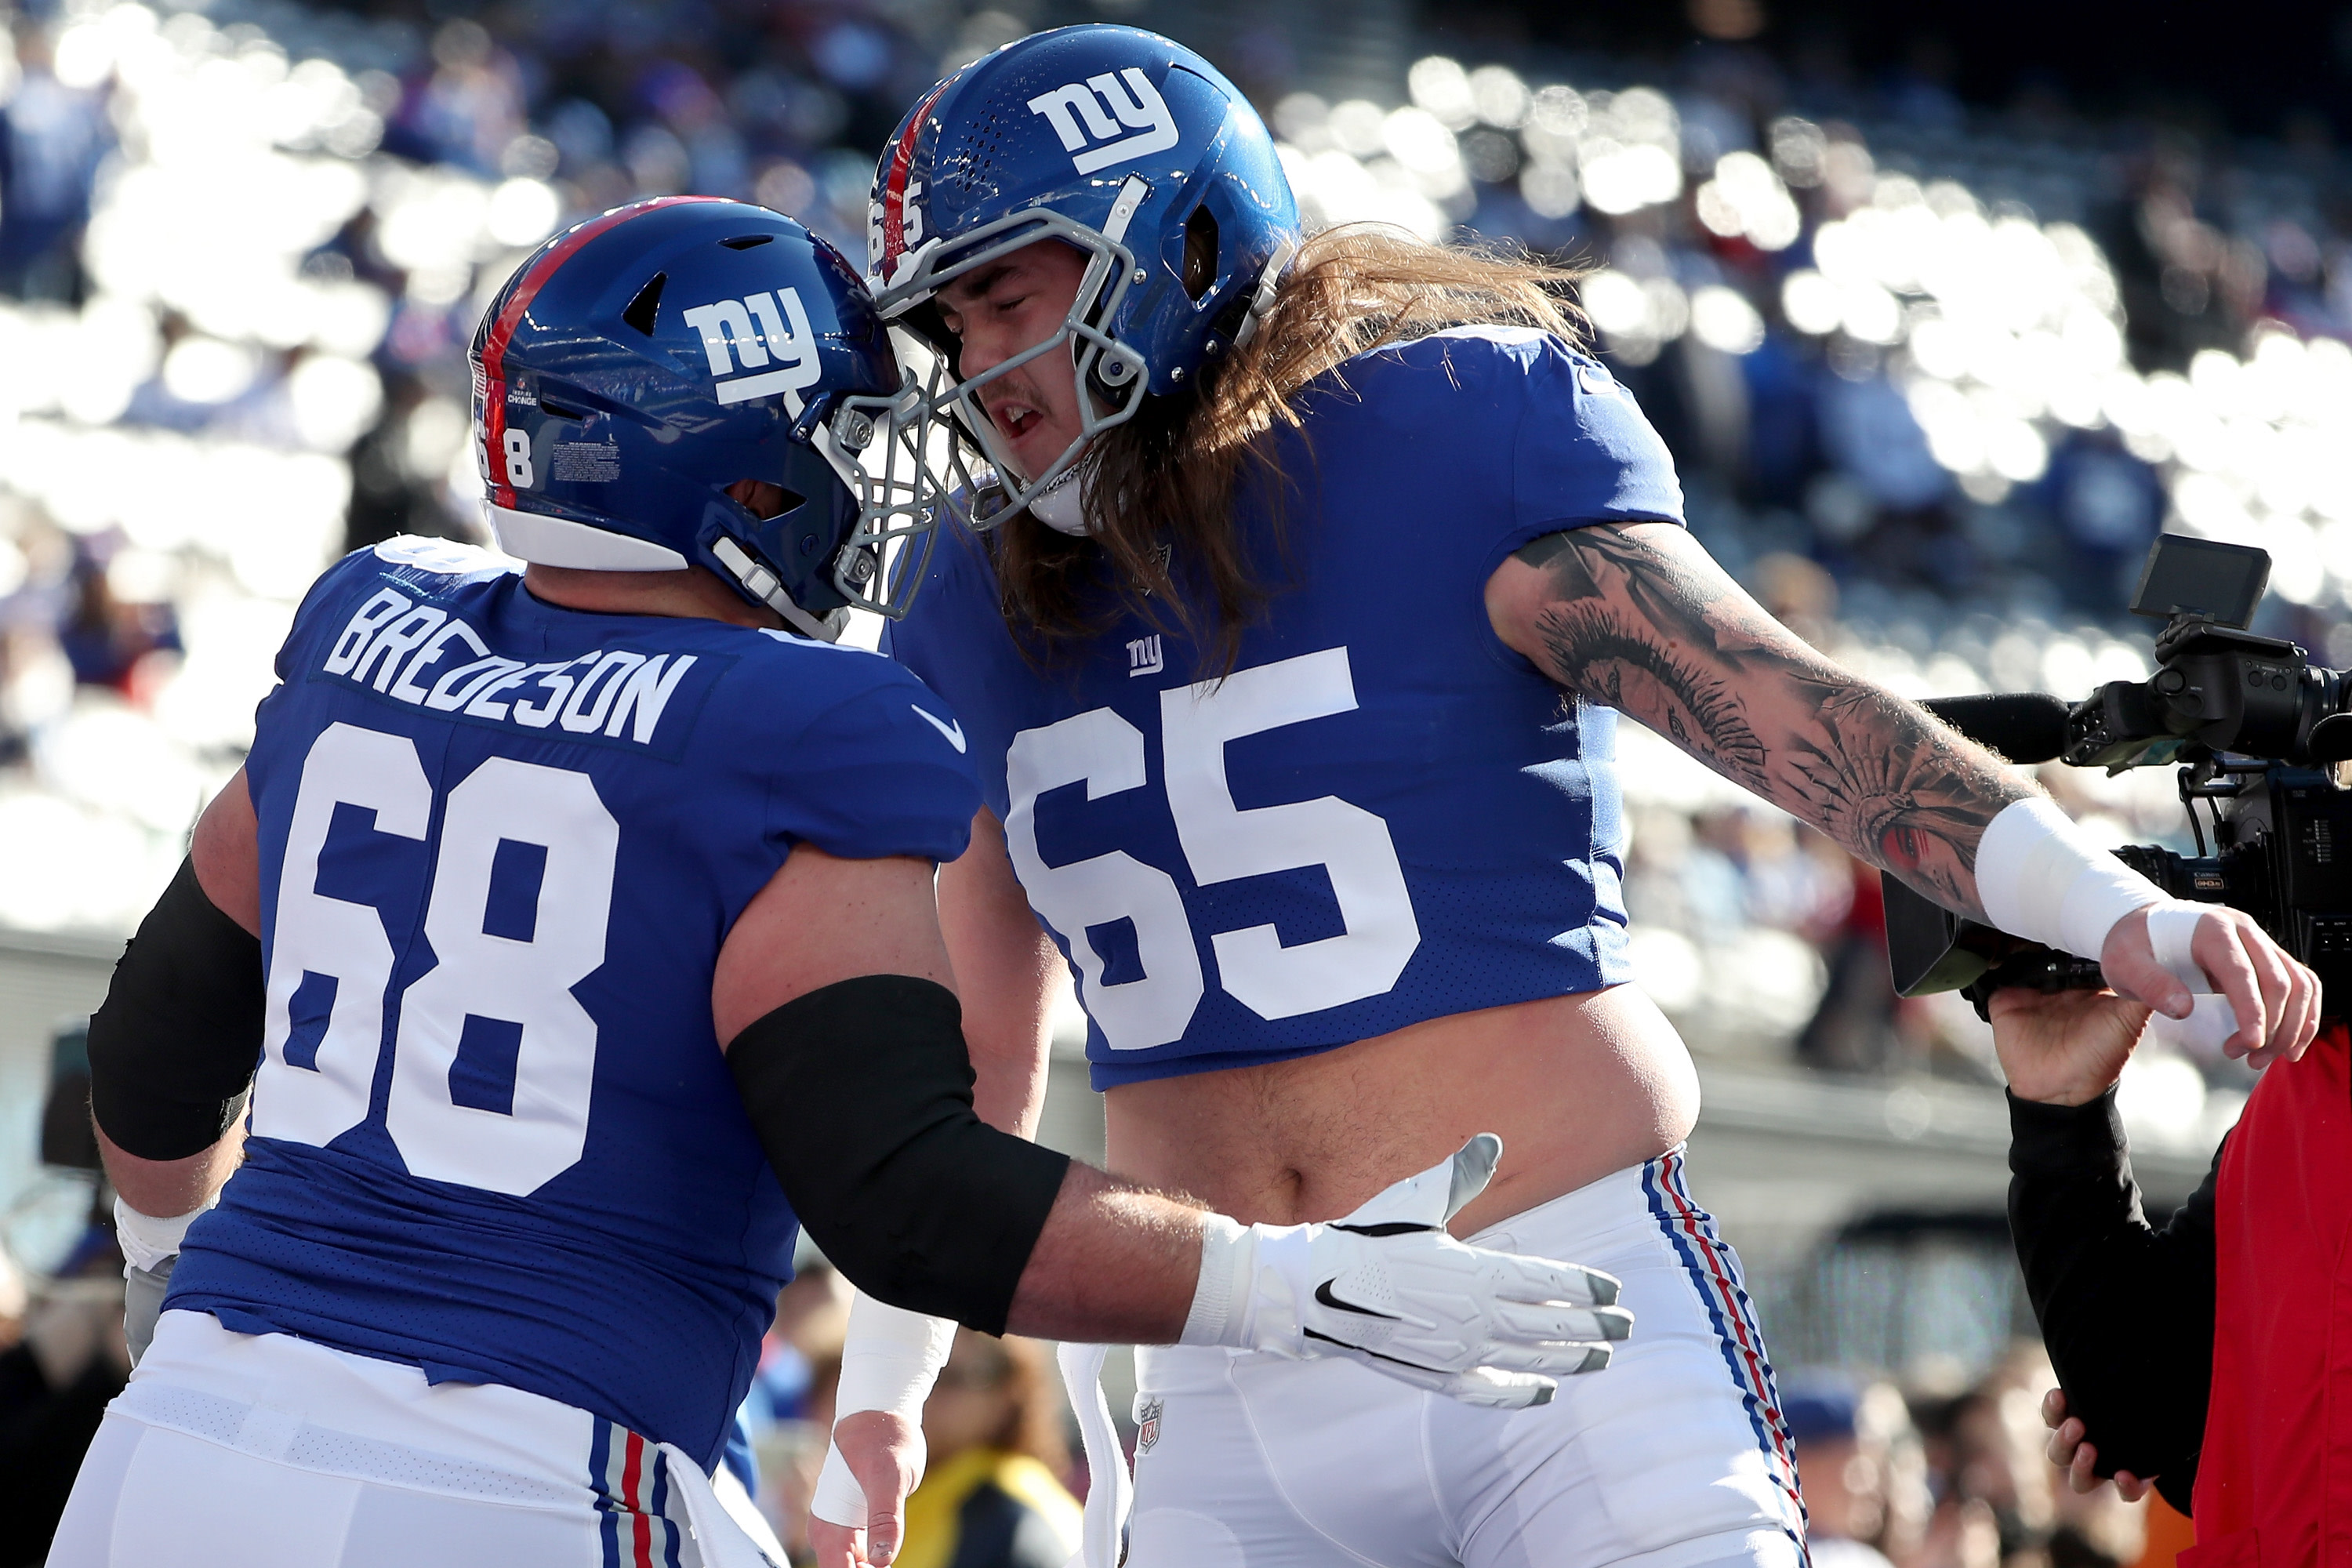 The Giants Need to Change their Uniforms - New York Sports Nation